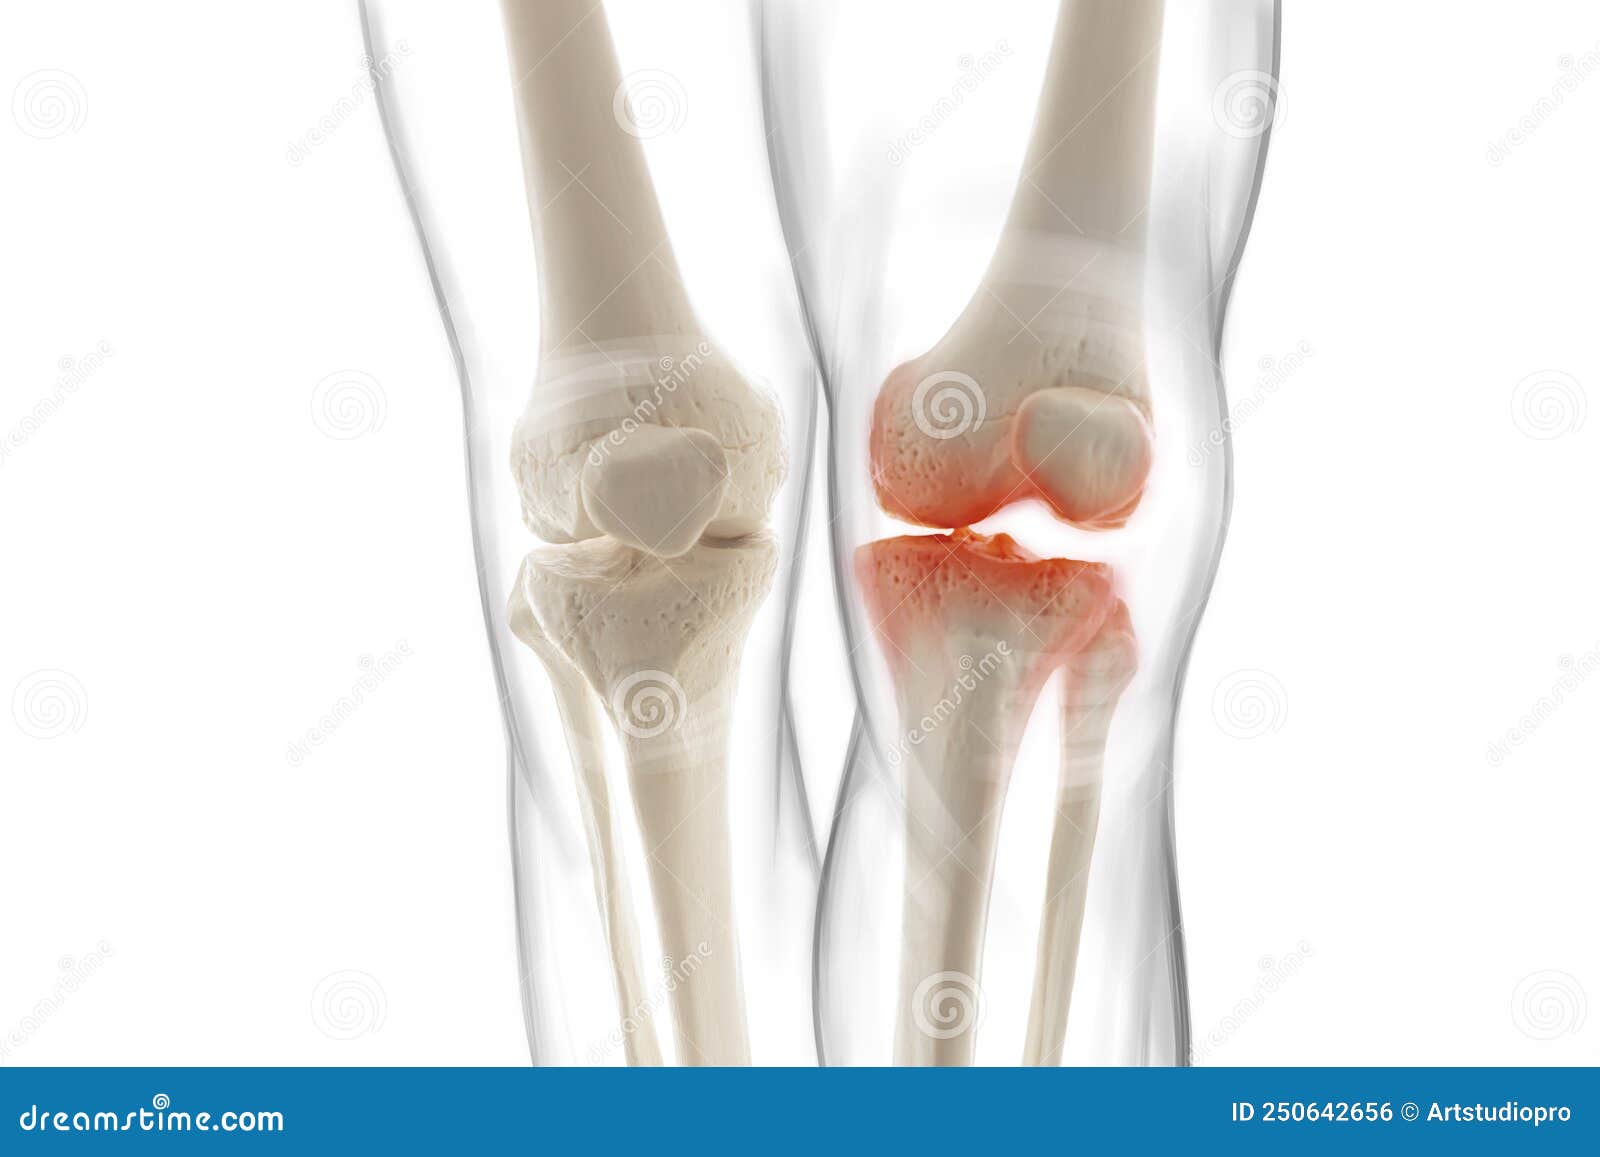 medically accurate representation of an arthritic knee joint, knee meniscus, human leg, 3d 